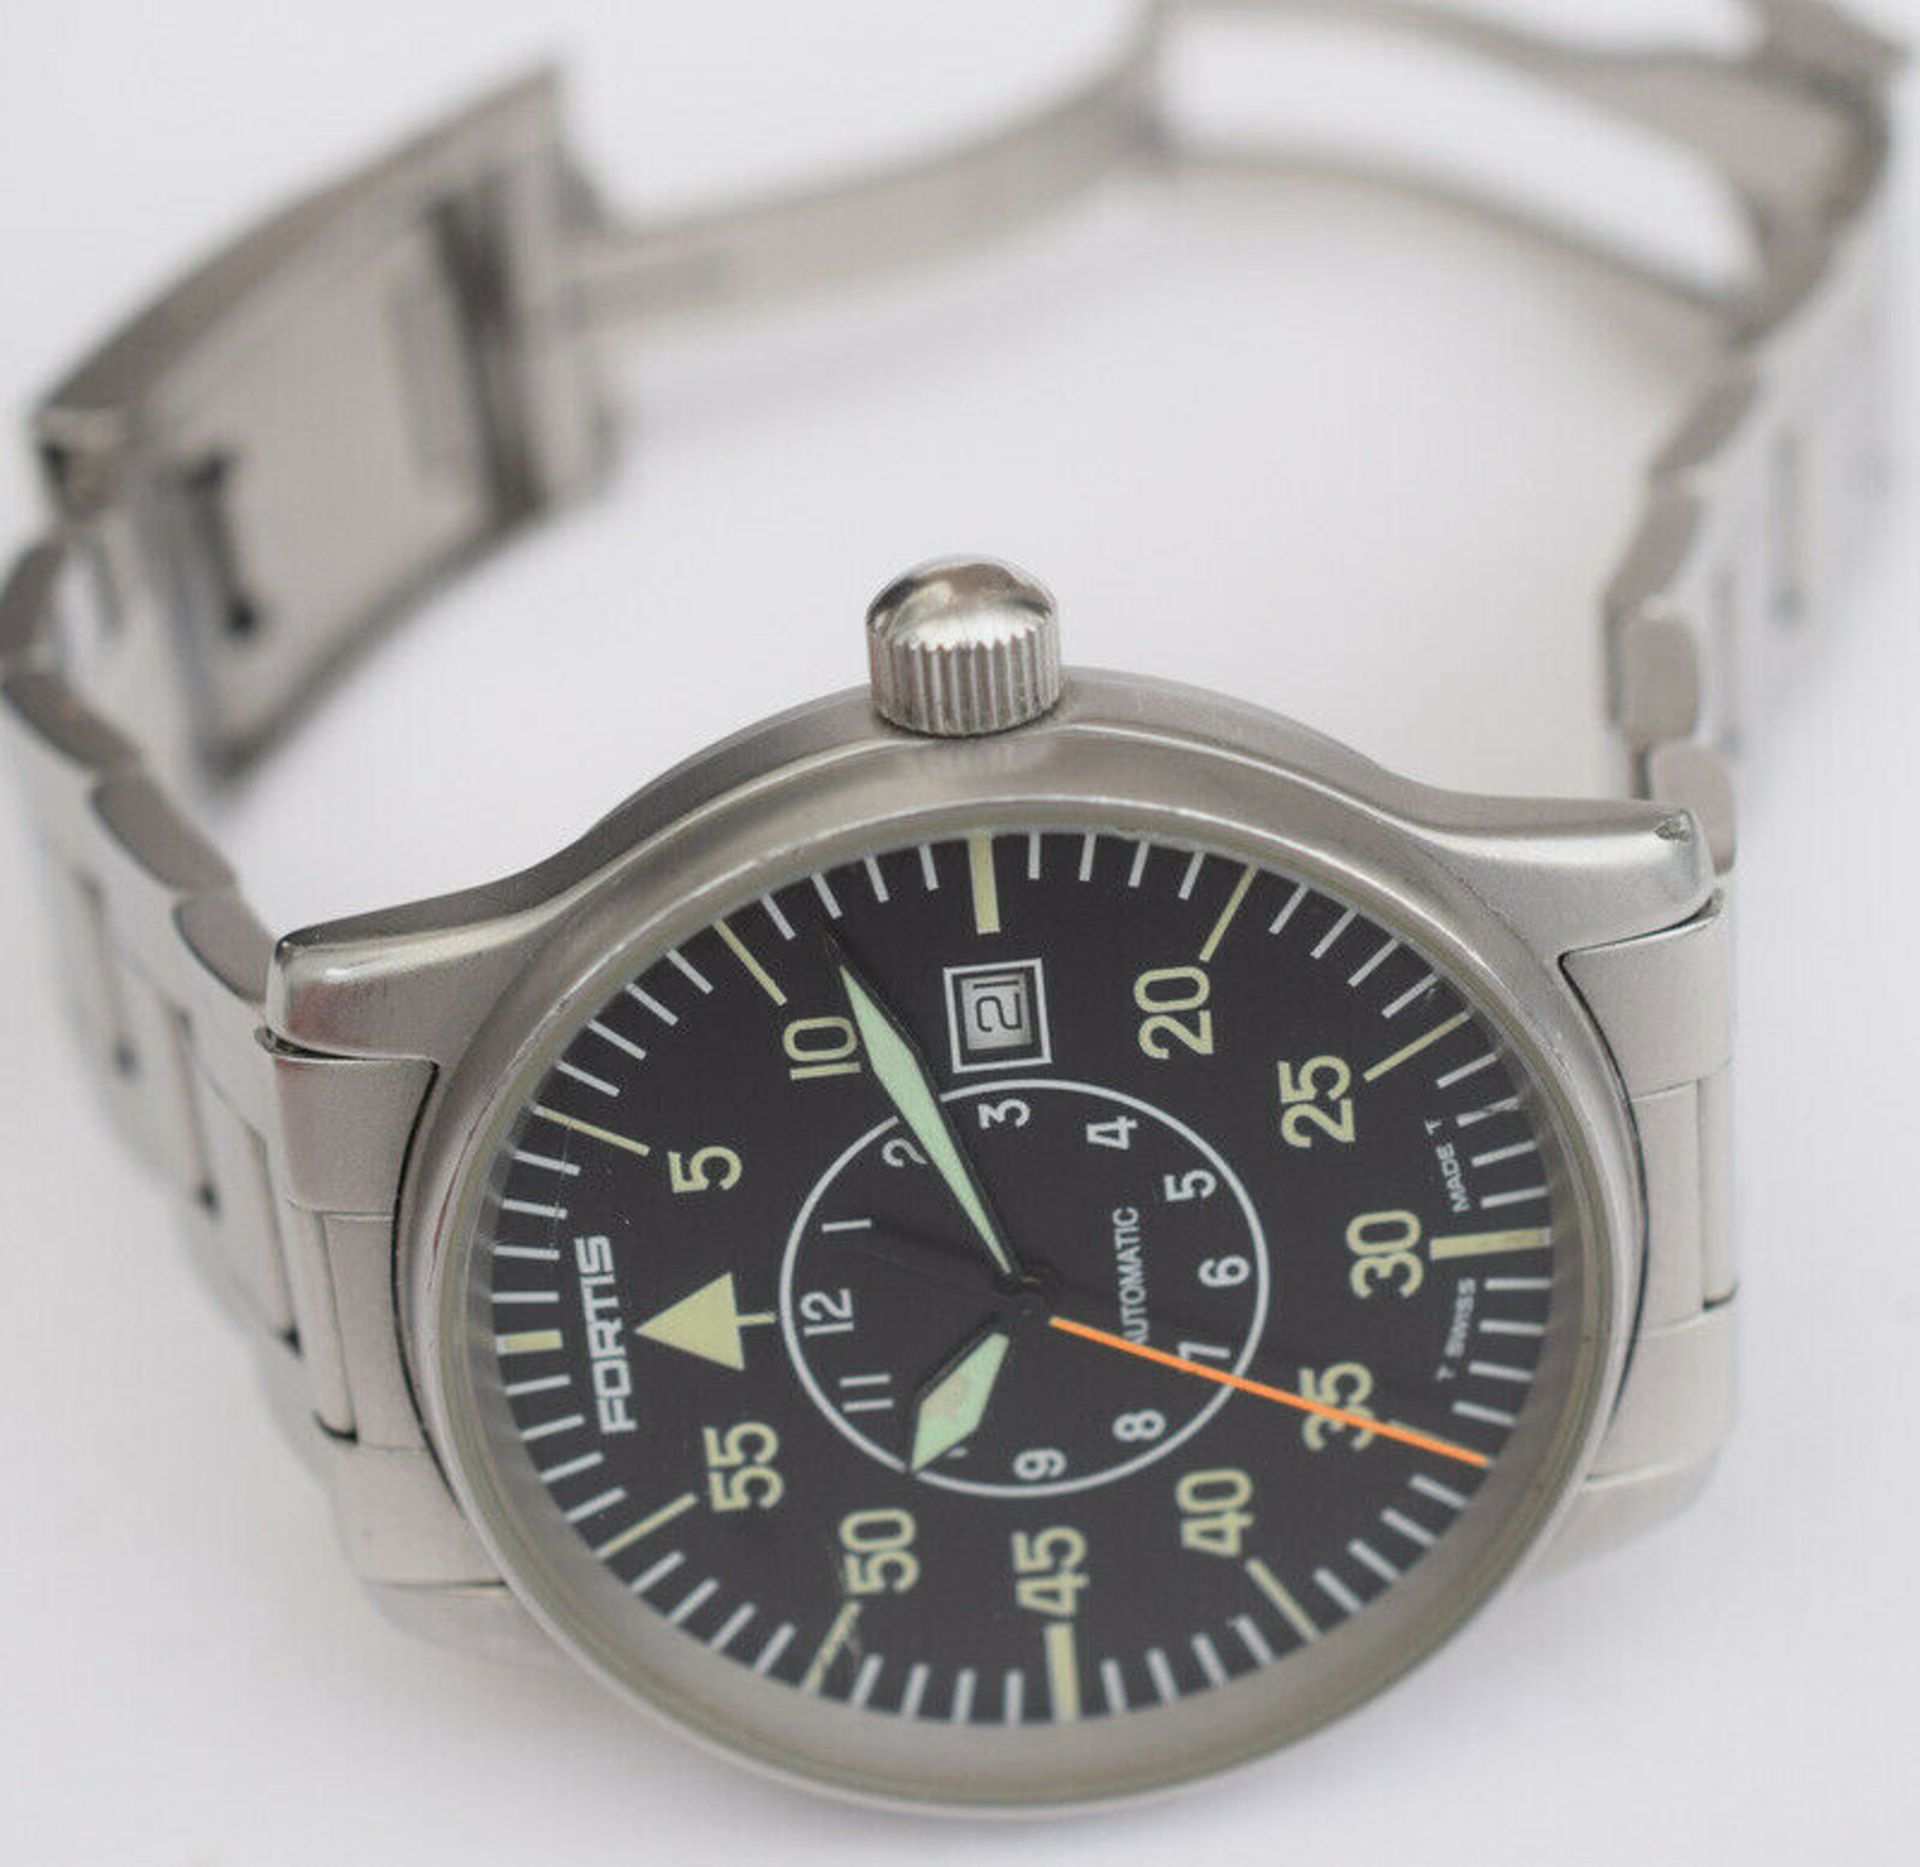 Vintage Fortis Flieger Automatic 595.10.46 Pilot's Watch Full Set - Image 6 of 9